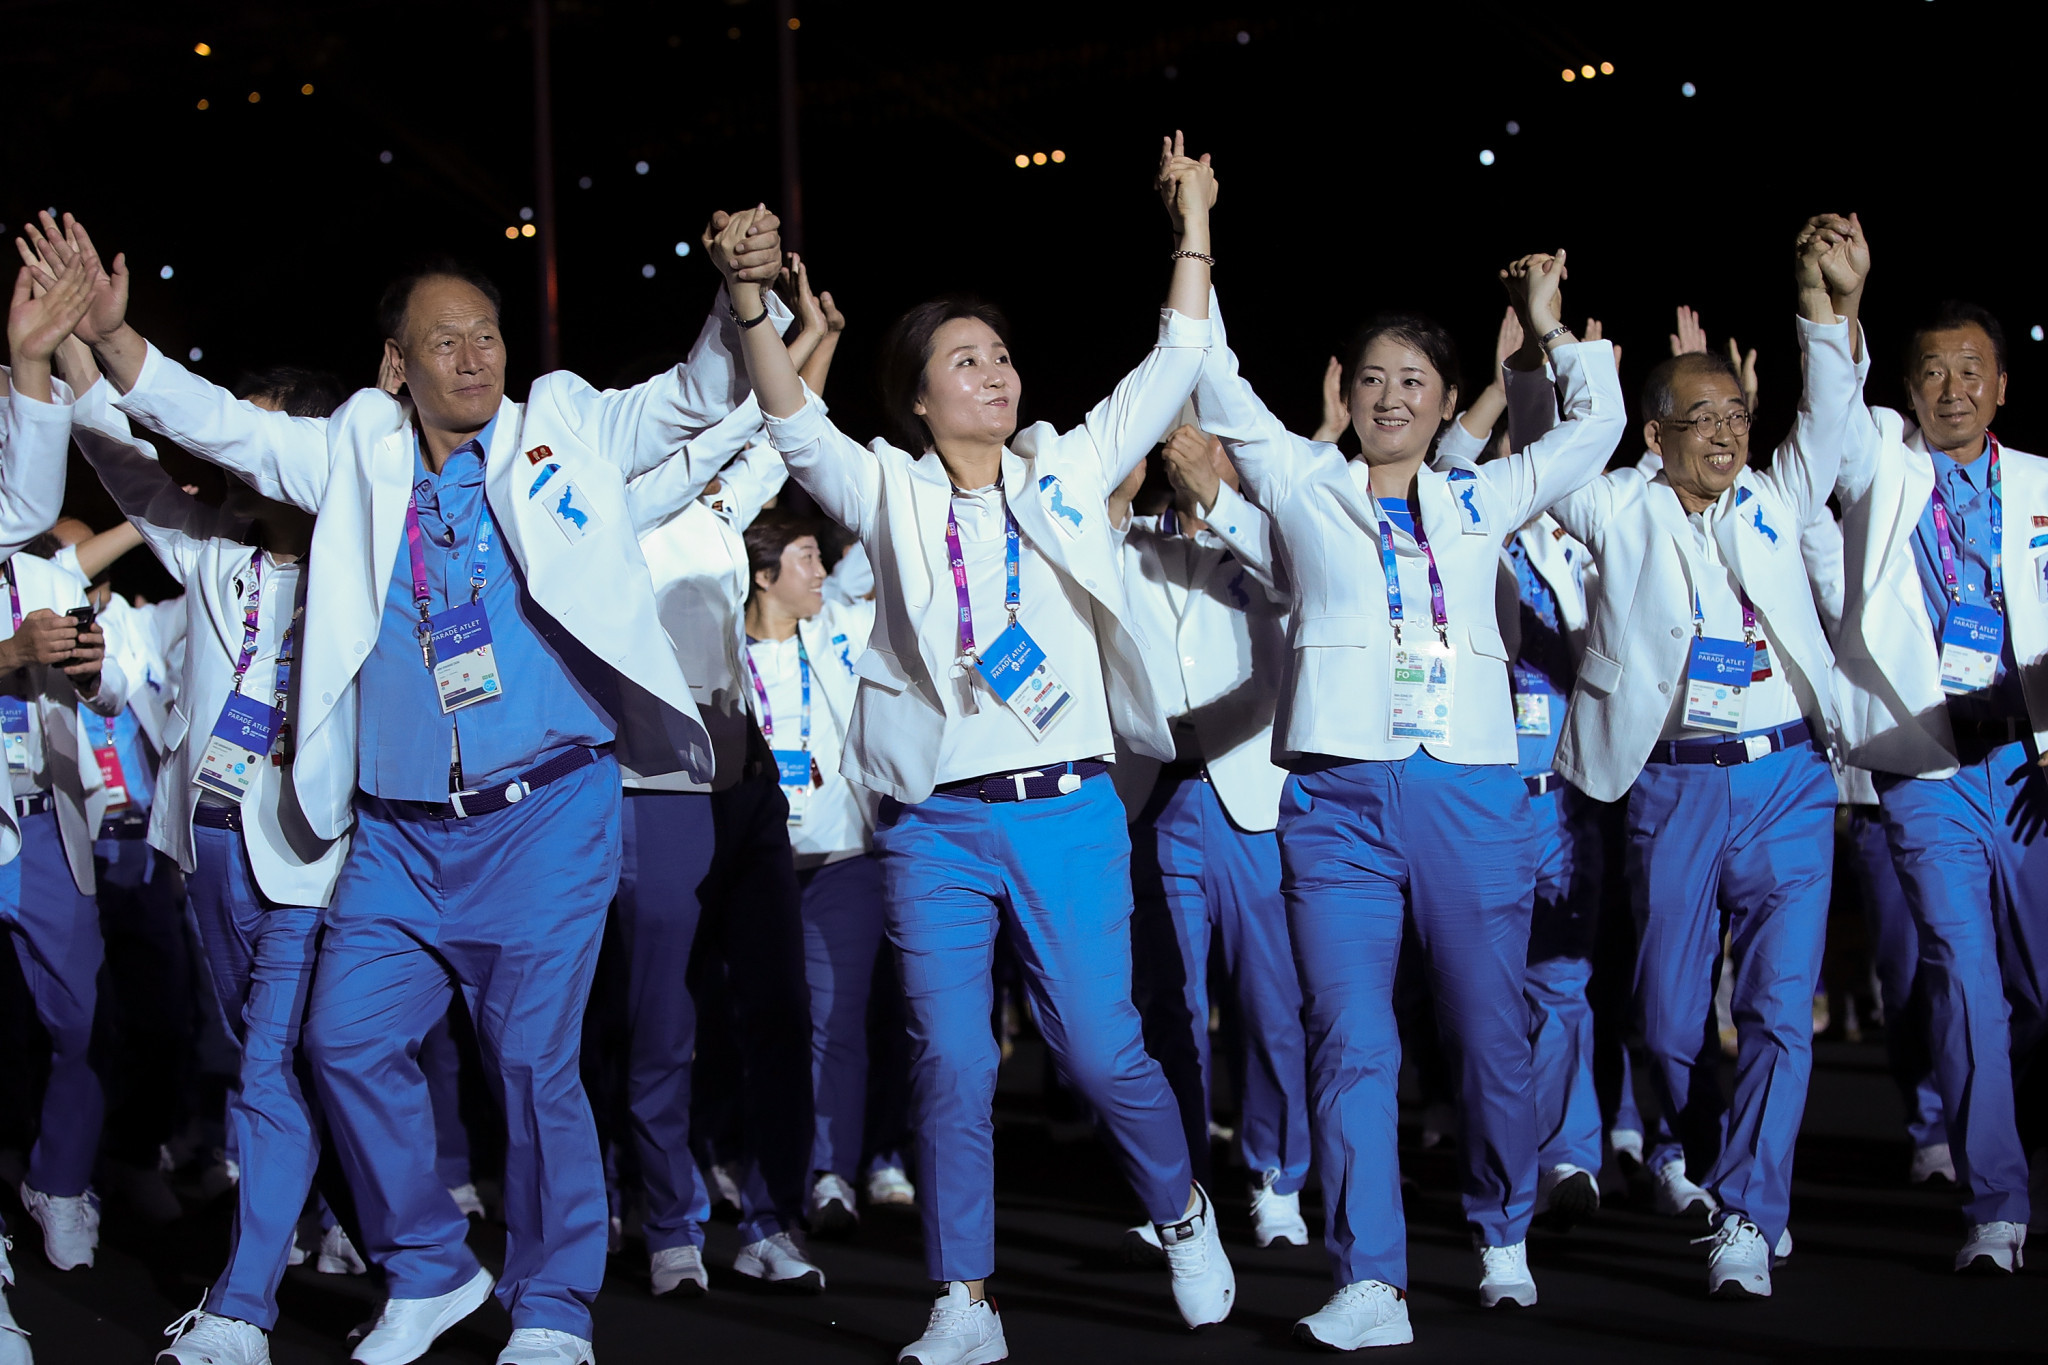 North and South Korea marched together at the 2018 Asian Games but the Asian Para Games will be the first Paralympic-style event at which they will do so ©Getty Images